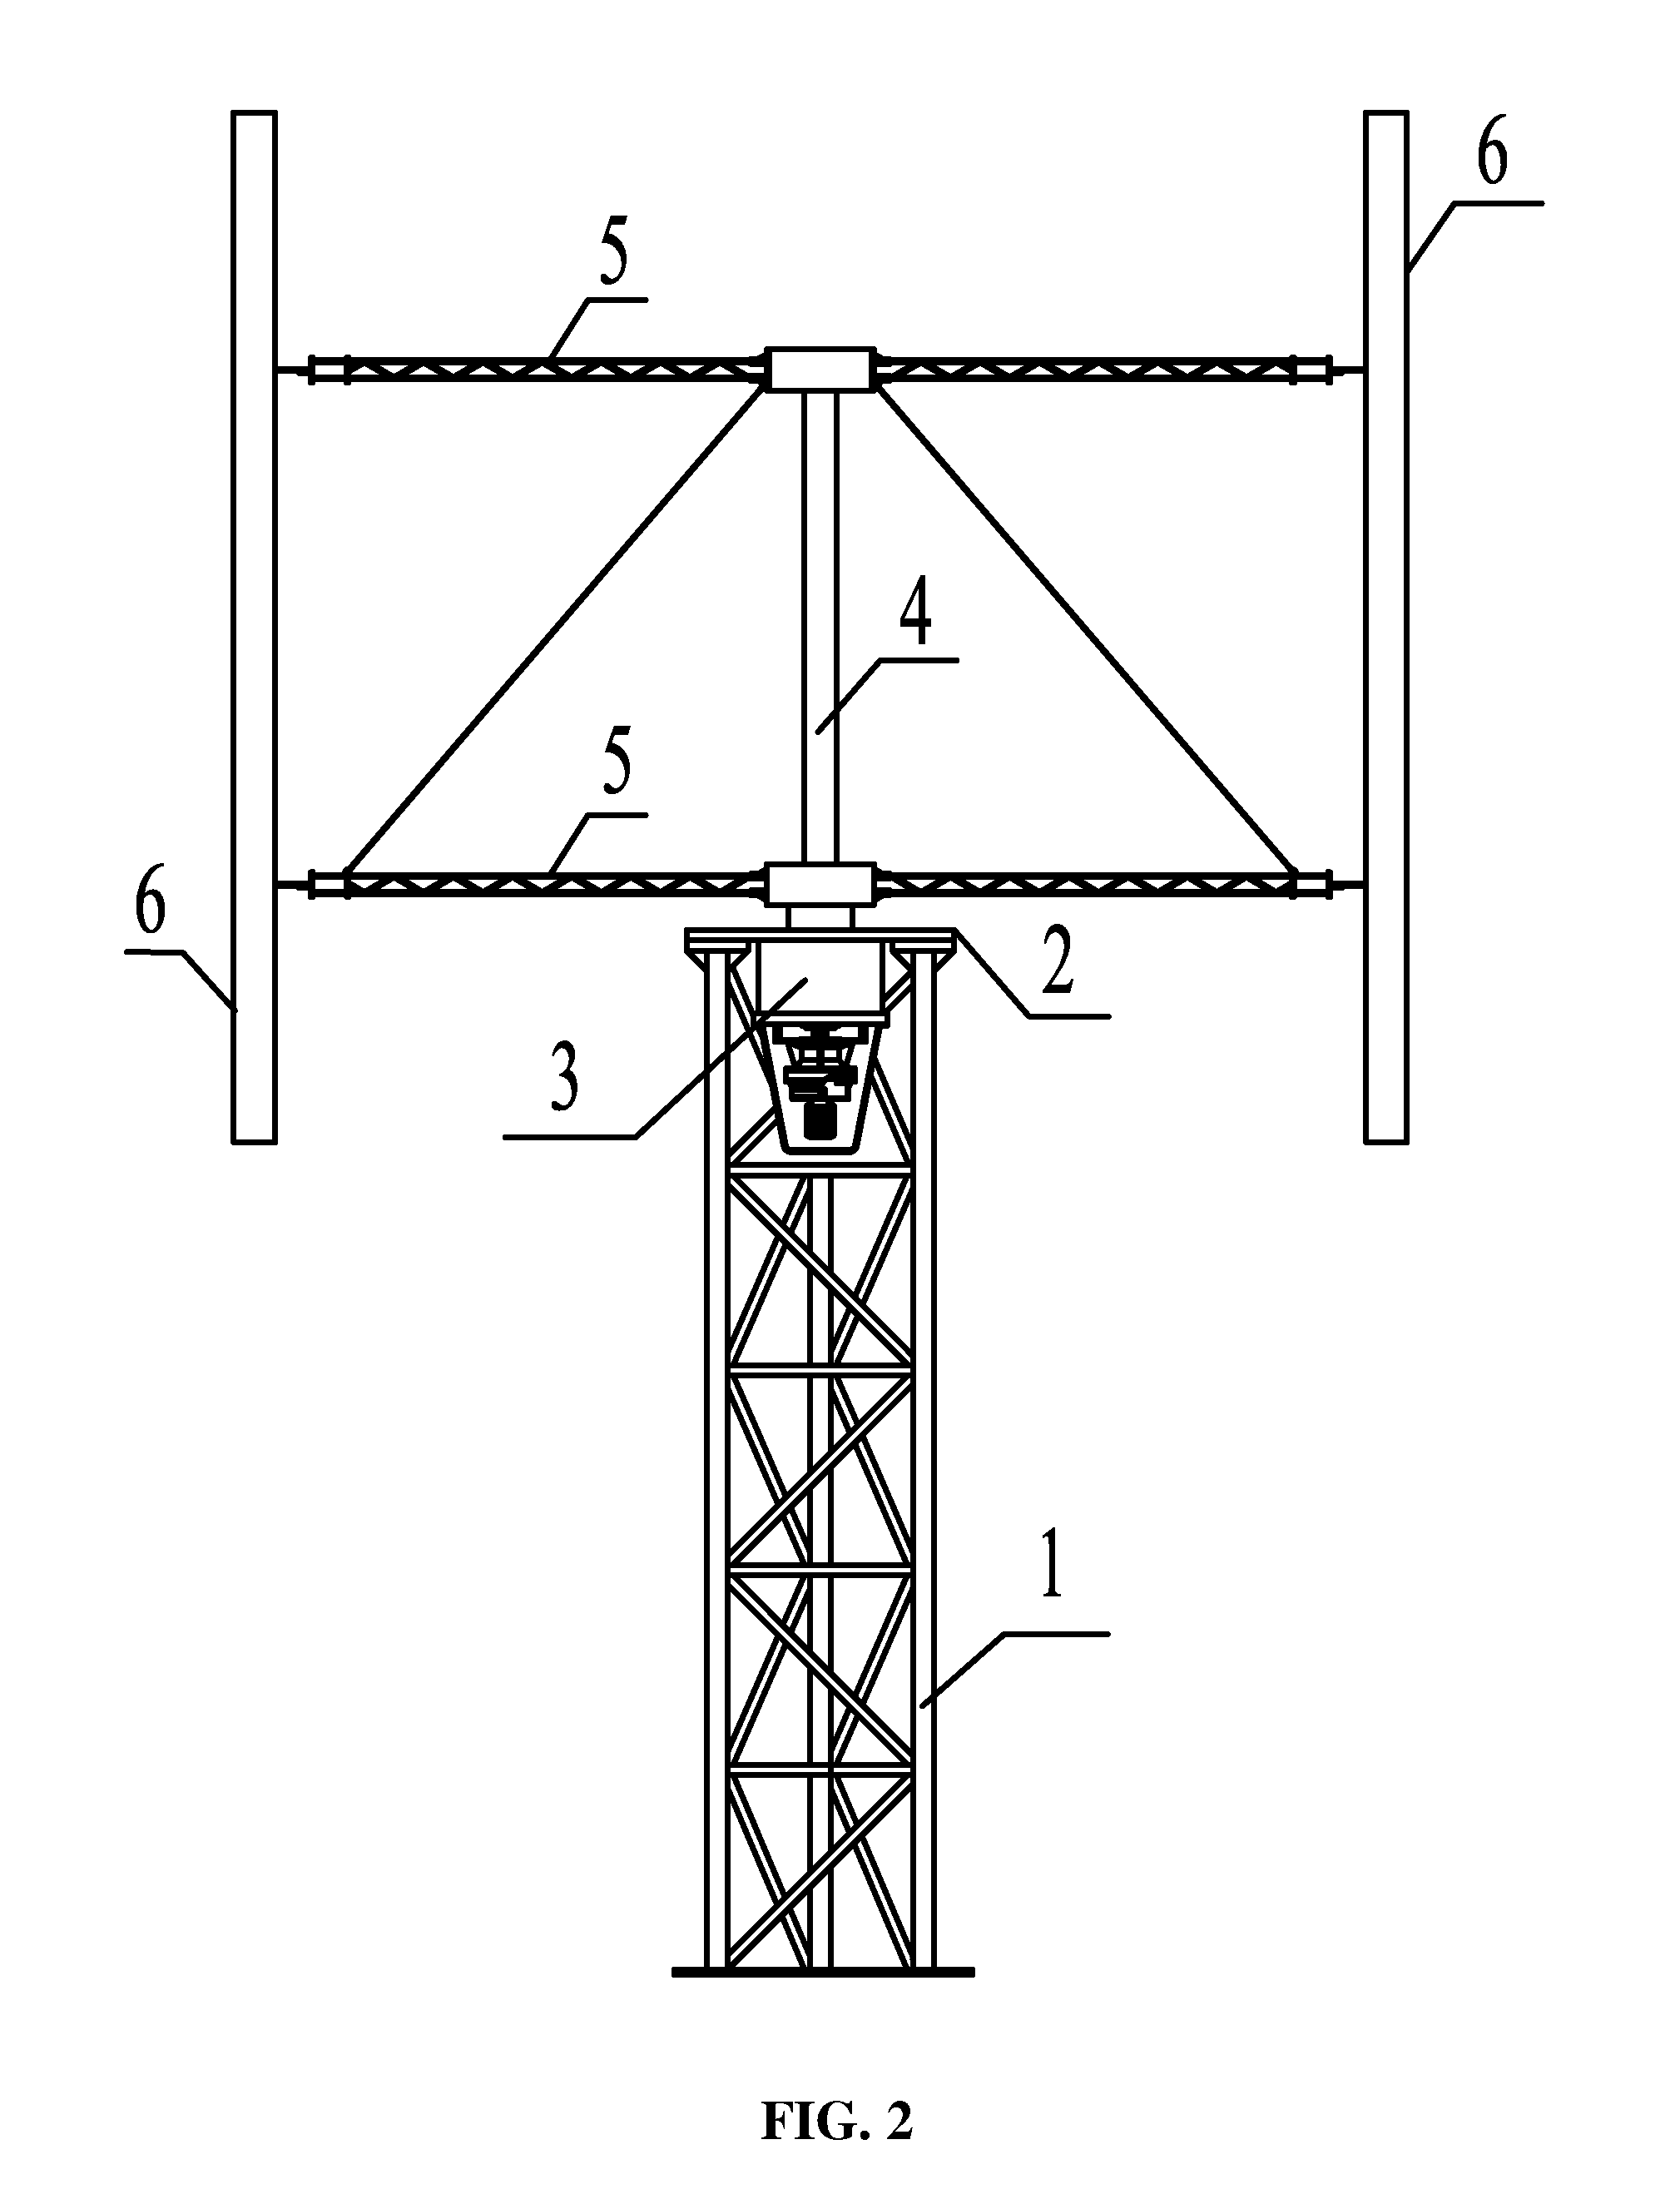 Support for a large vertical axis wind turbine